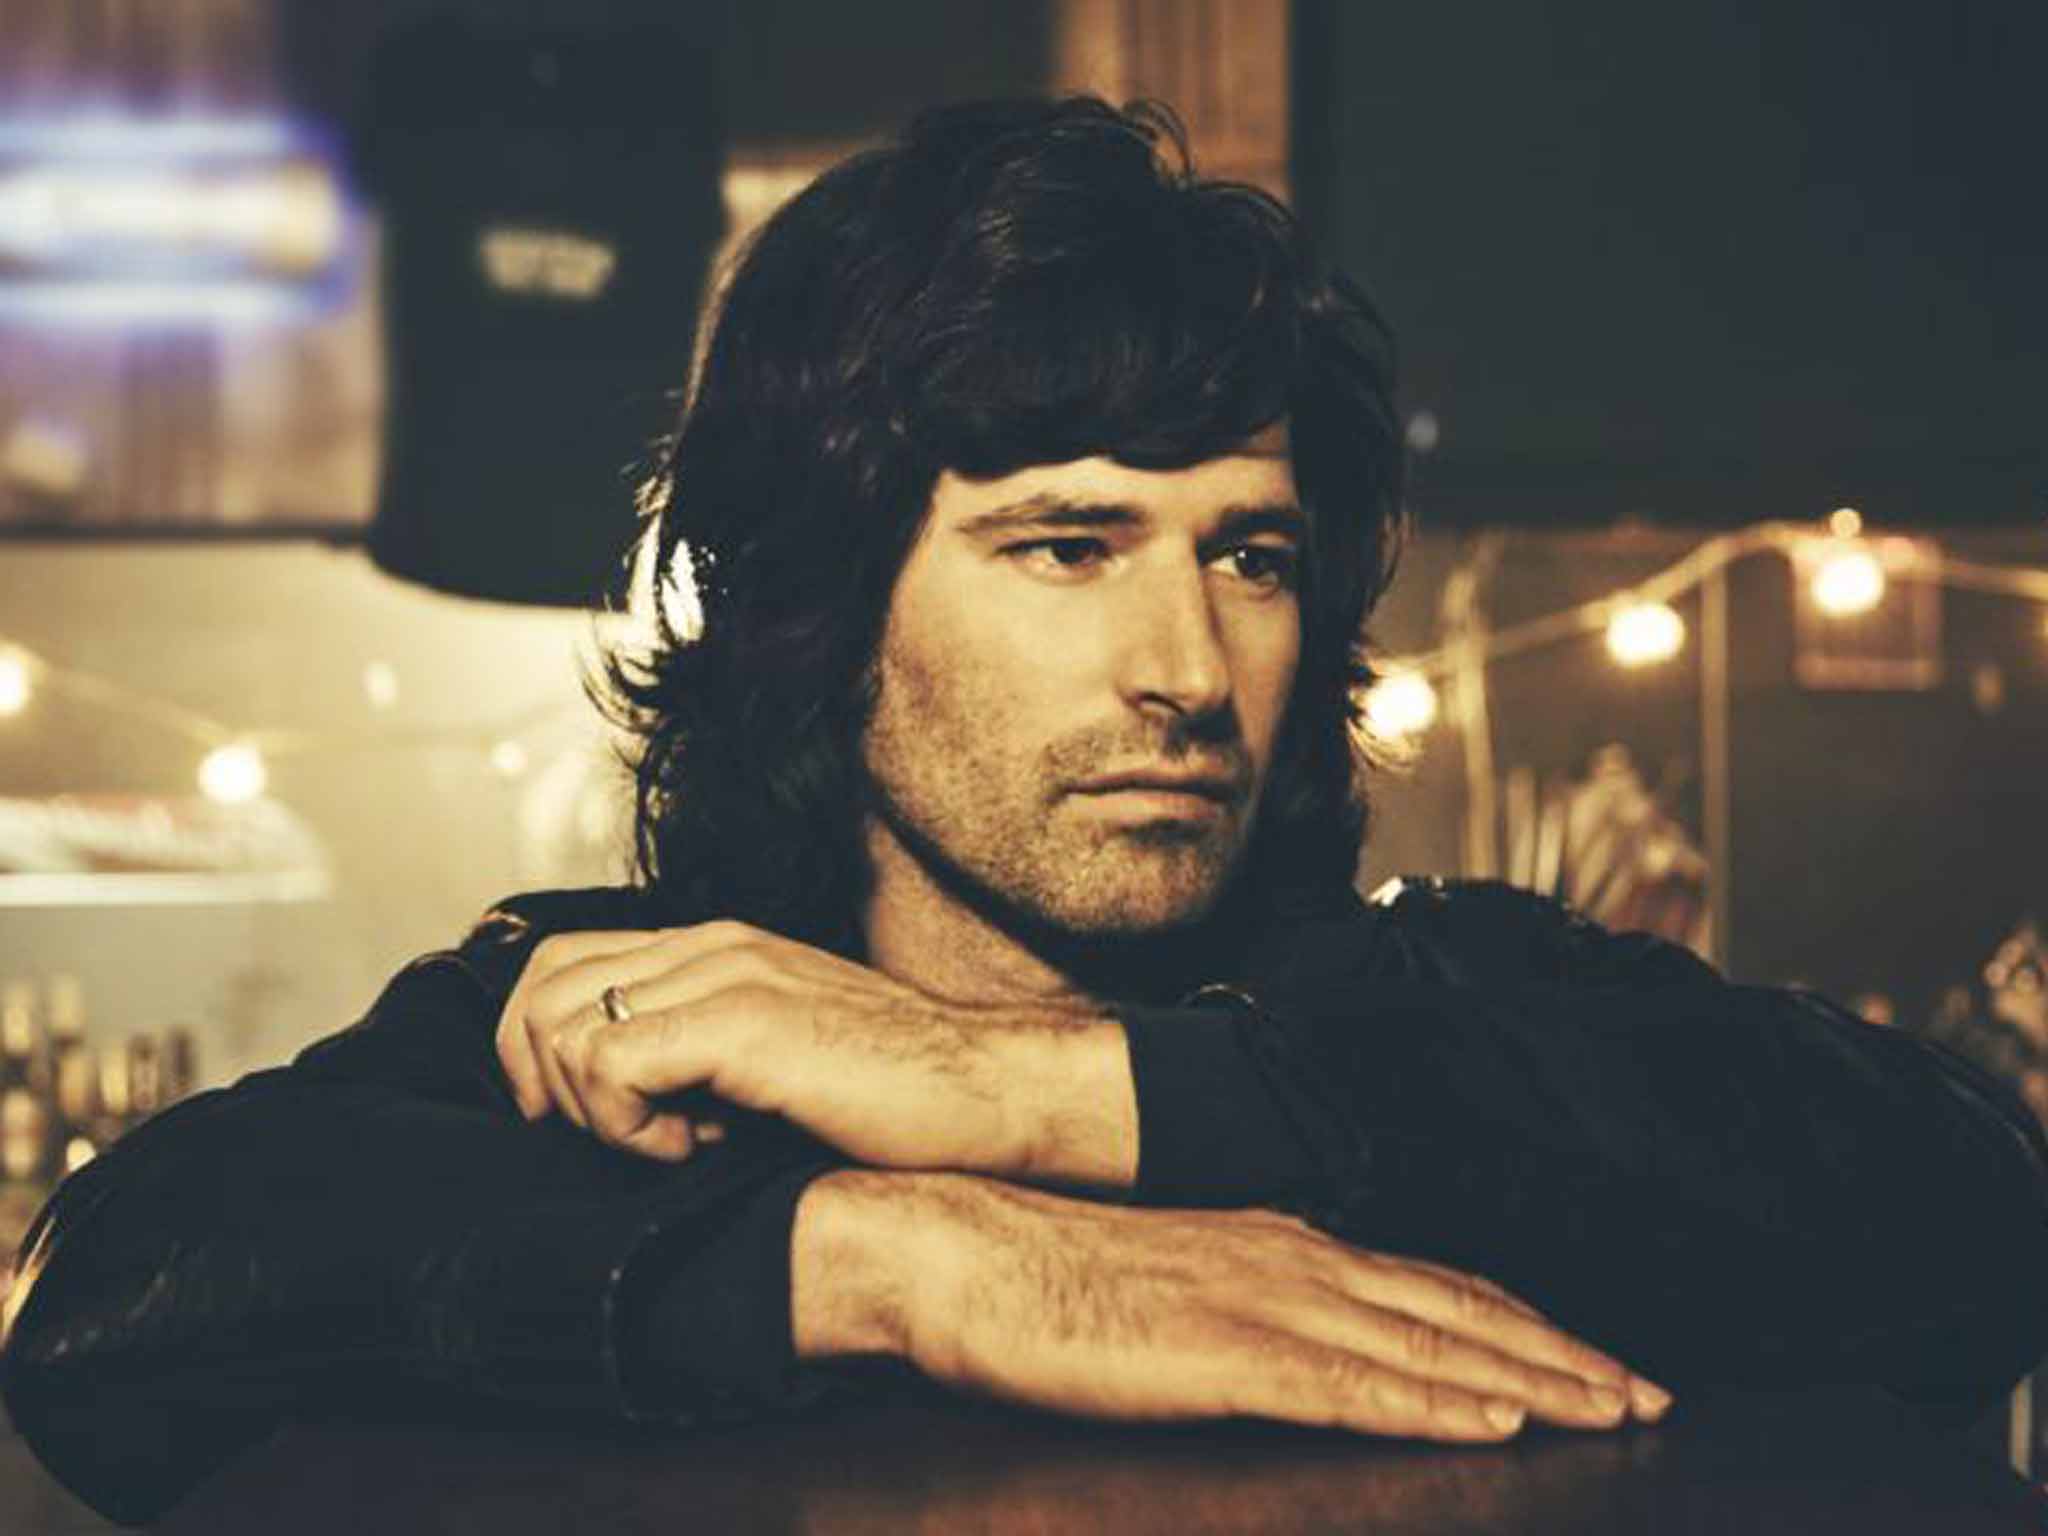 Time out: a track on Pete Yorn's new album is inspired by John Lennon